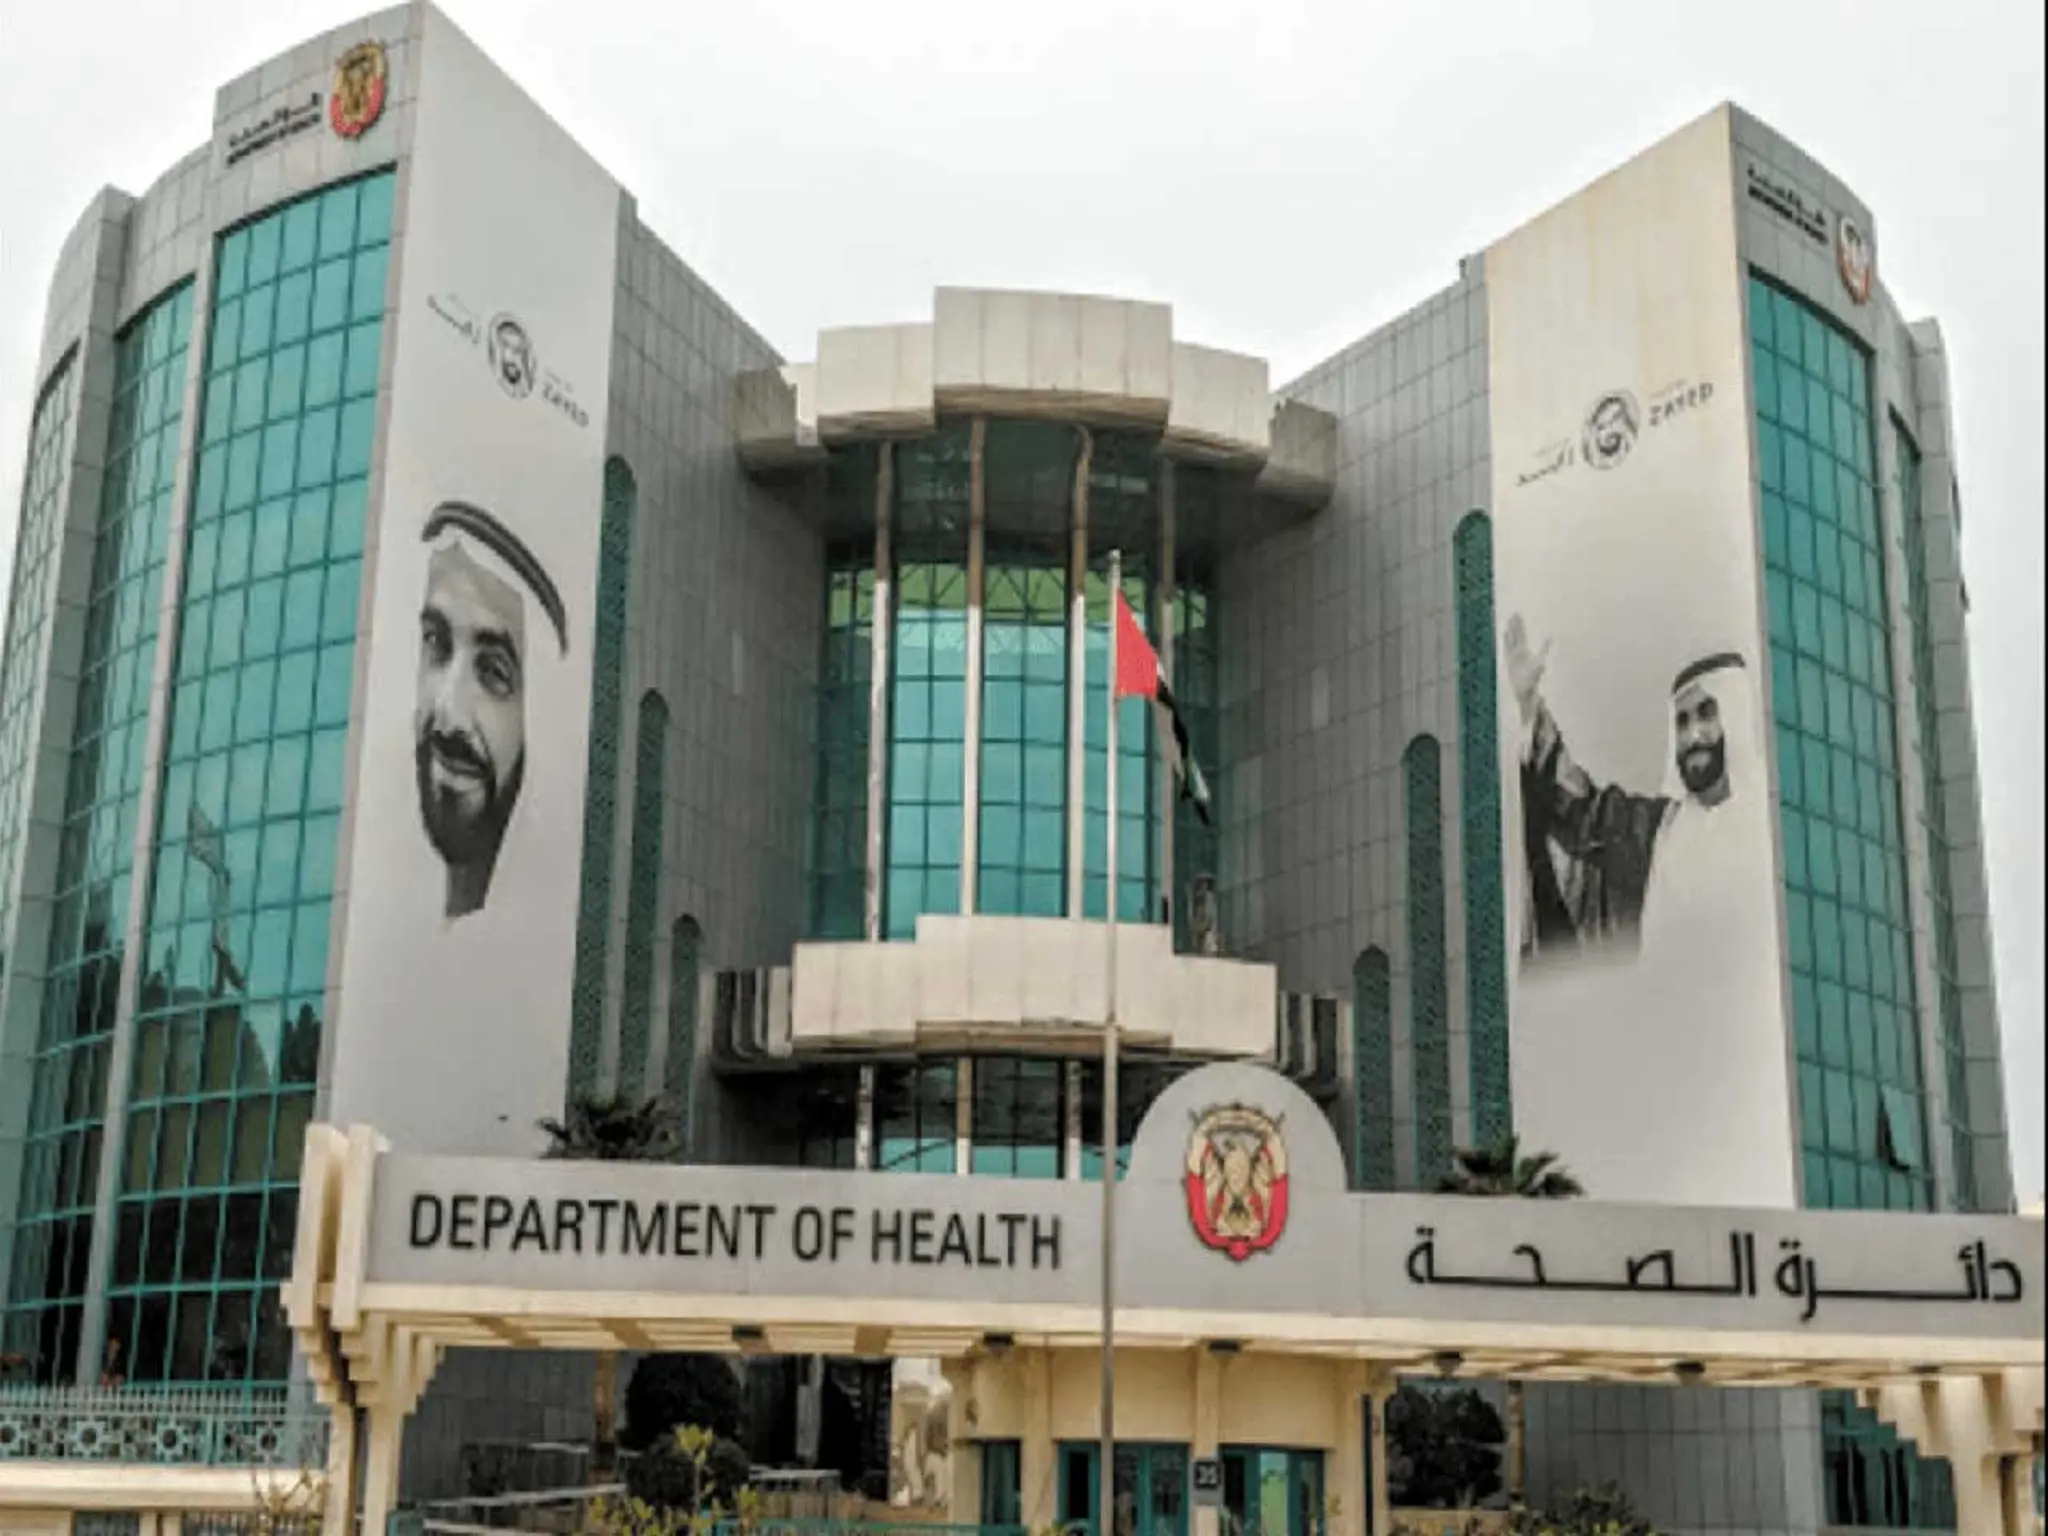 Abu Dhabi: Health insurance for foreign residents that provides them with services worth 250,000 dirhams